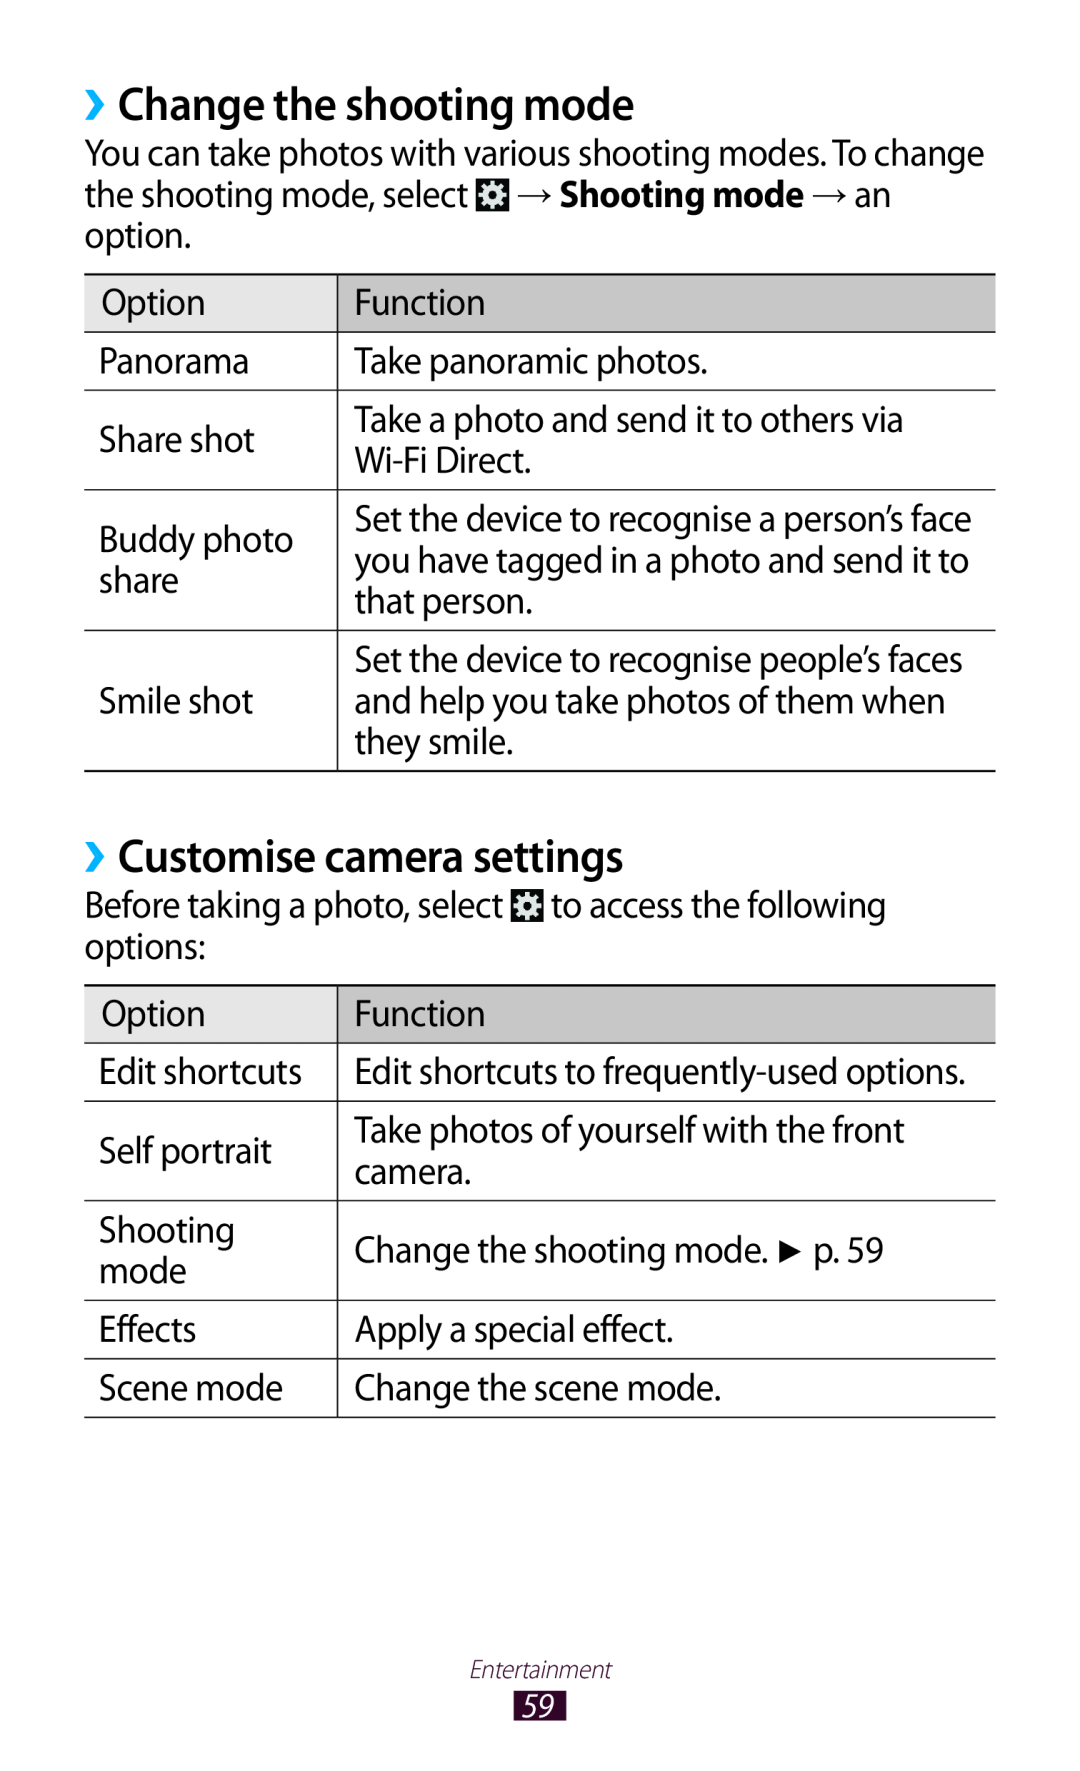 Samsung GTP5110ZWMTTT ››Change the shooting mode, ››Customise camera settings, you have tagged in a photo and send it to 